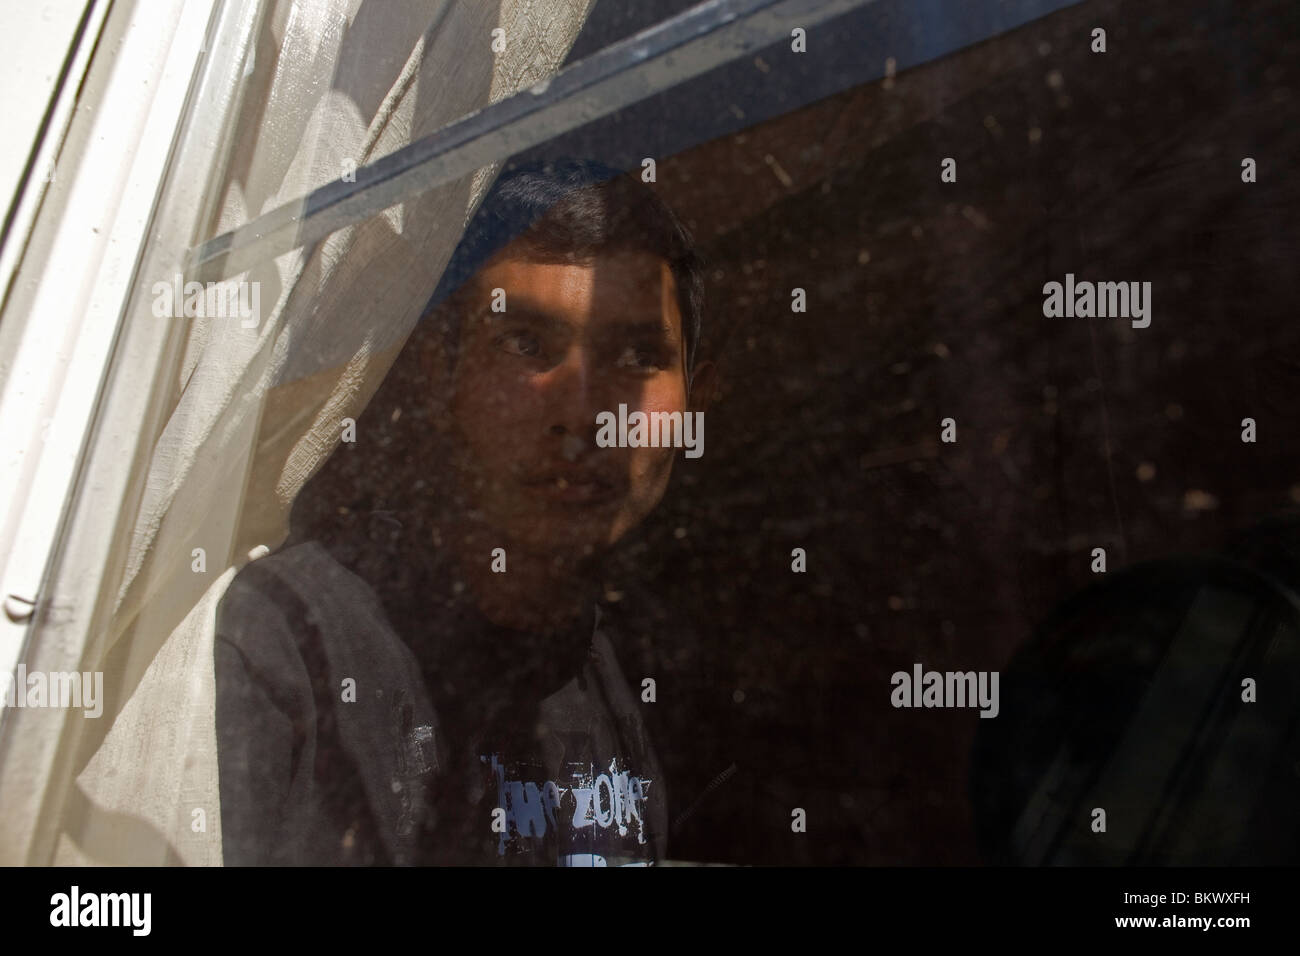 An undocumentd Central American migrant, traveling across Mexico to work in the US, peers through a window in Mexico City. Stock Photo